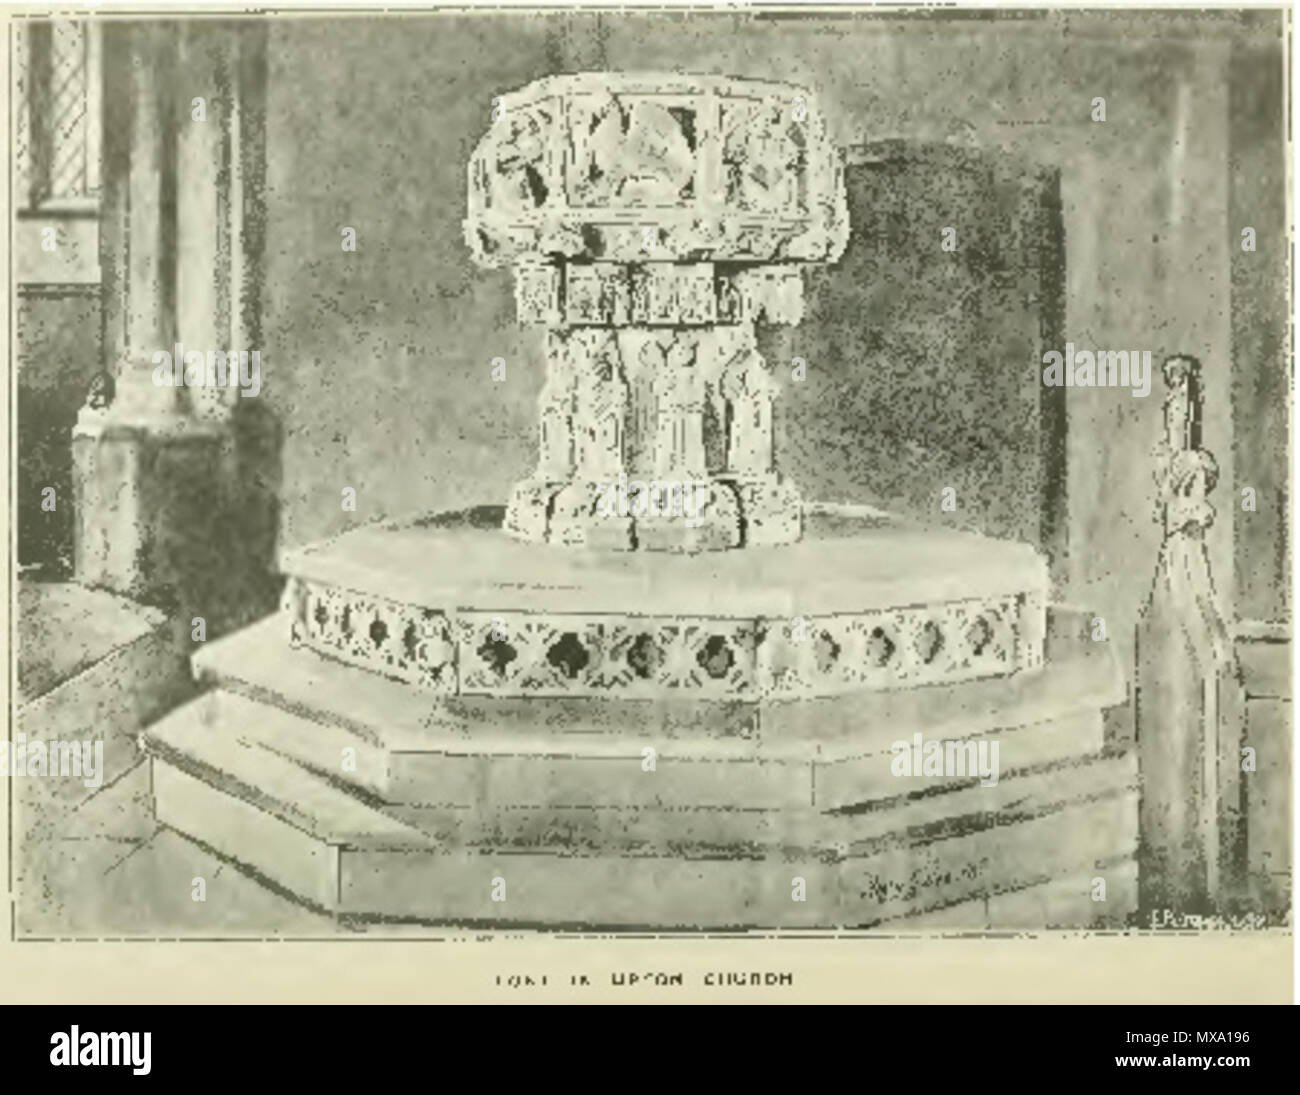 . English: 'Font in Upton Church' by Henry Gales, ink drawing . 31 December 1891. Henry Gales (artist) 274 Henry Gales - Font in Upton Church Stock Photo